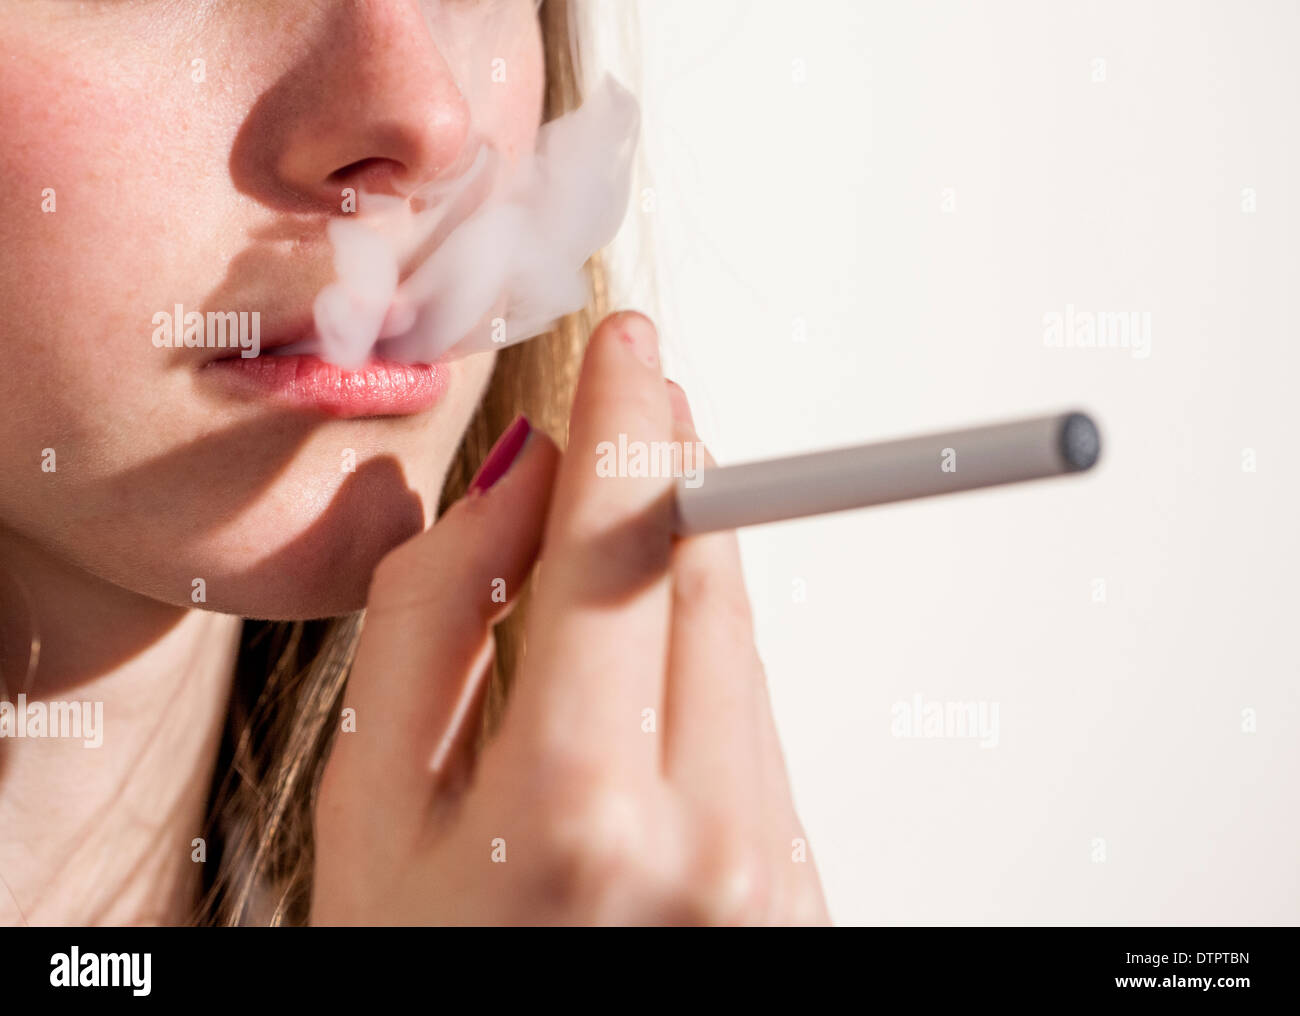 Young teenage girl smoking e or electronic cigarette, image is anonymous Stock Photo